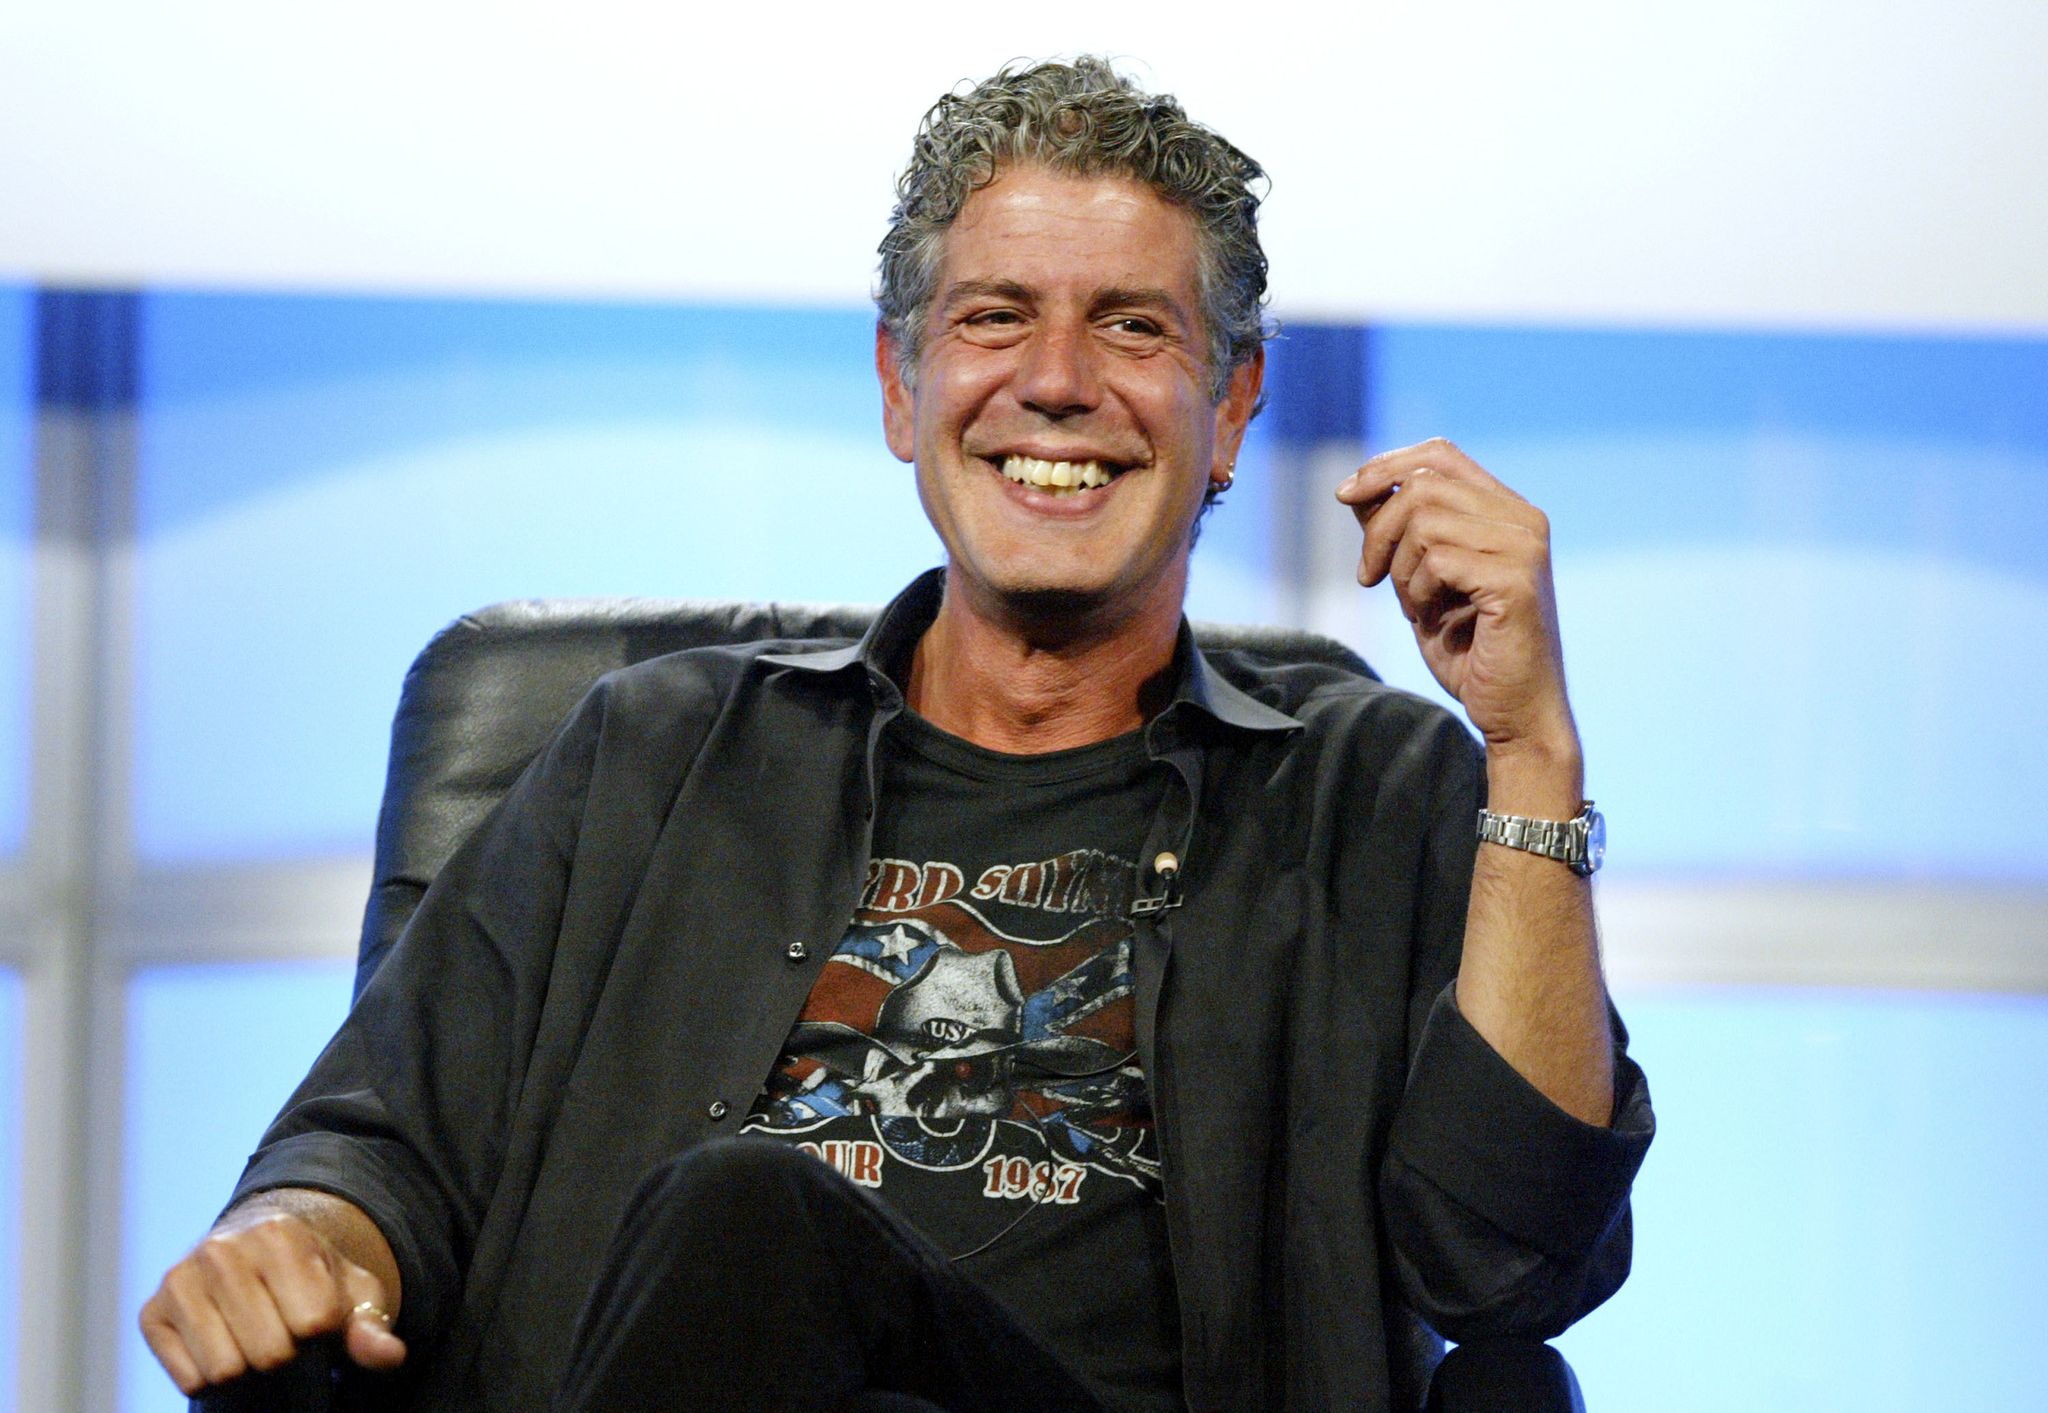 beverly hills, ca   july 16 host anthony bourdain attends the panel discussion for anthony bourdain no reservations during the discovery networks travel channel presentation at the 2005 television critics association summer press tour at the beverly hilton hotel on july 16, 2005 in beverly hills, california photo by frederick m browngetty images